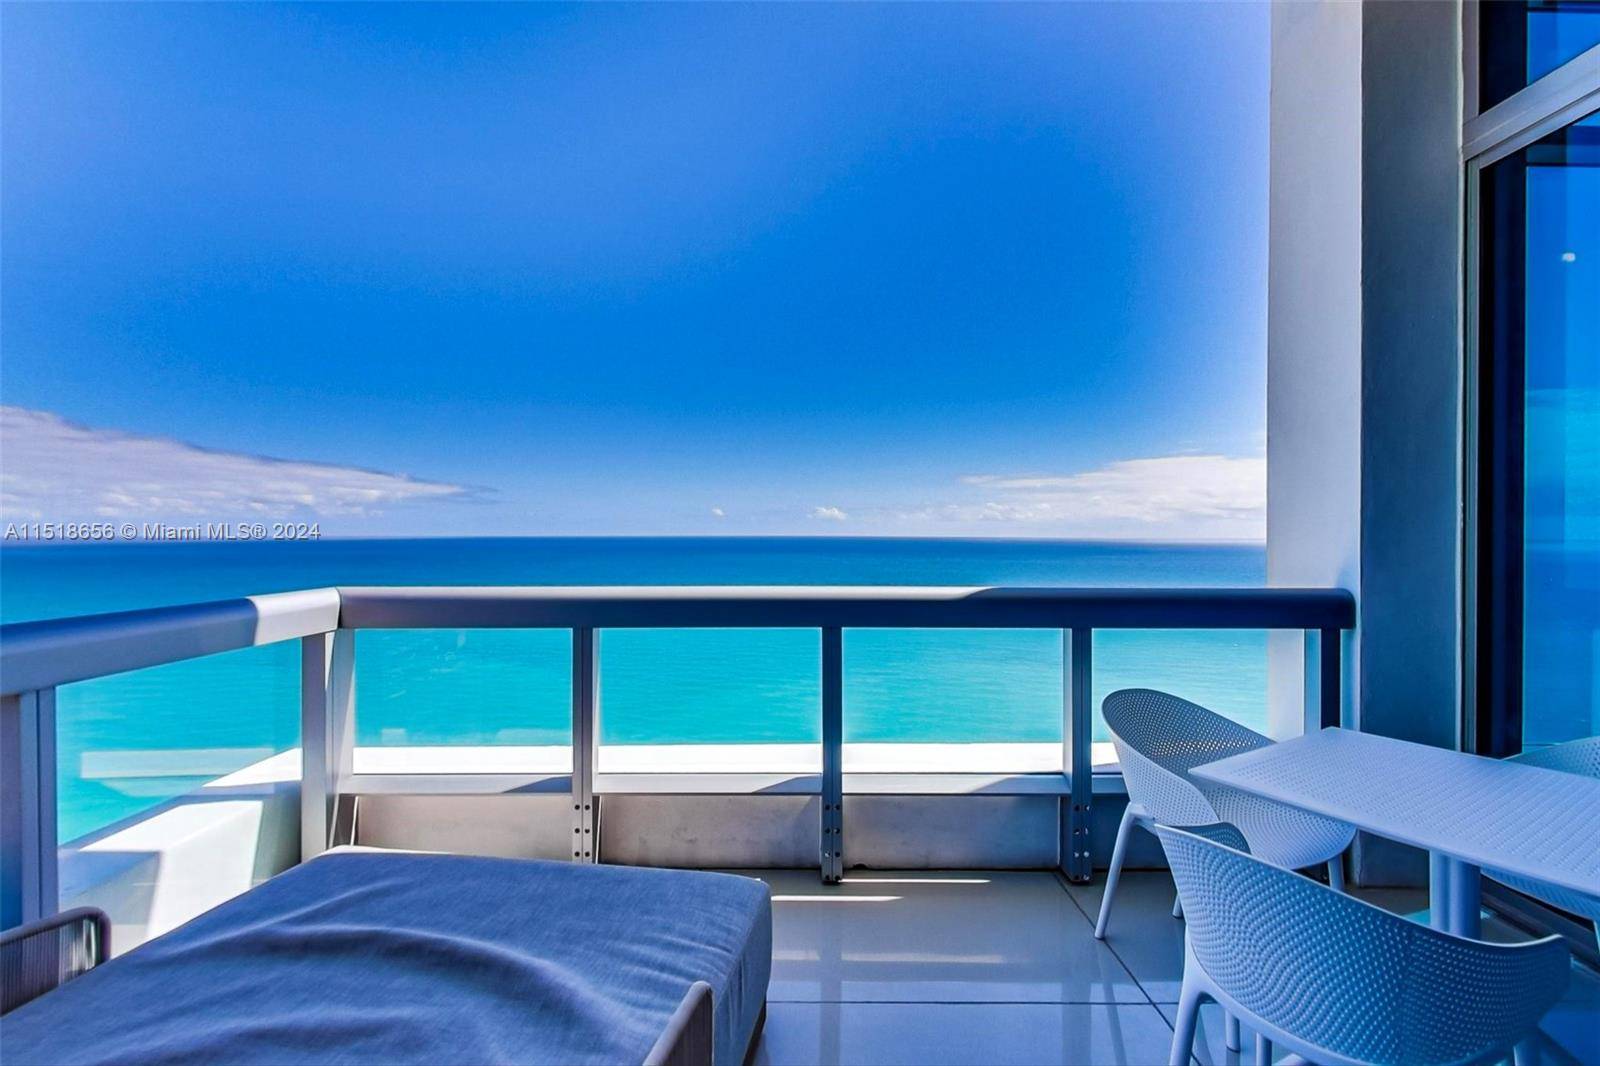 Discover luxury living at Carillon Resort in Miami Beach with this stunning penthouse in the clouds featuring designer furnishings and high ceilings.